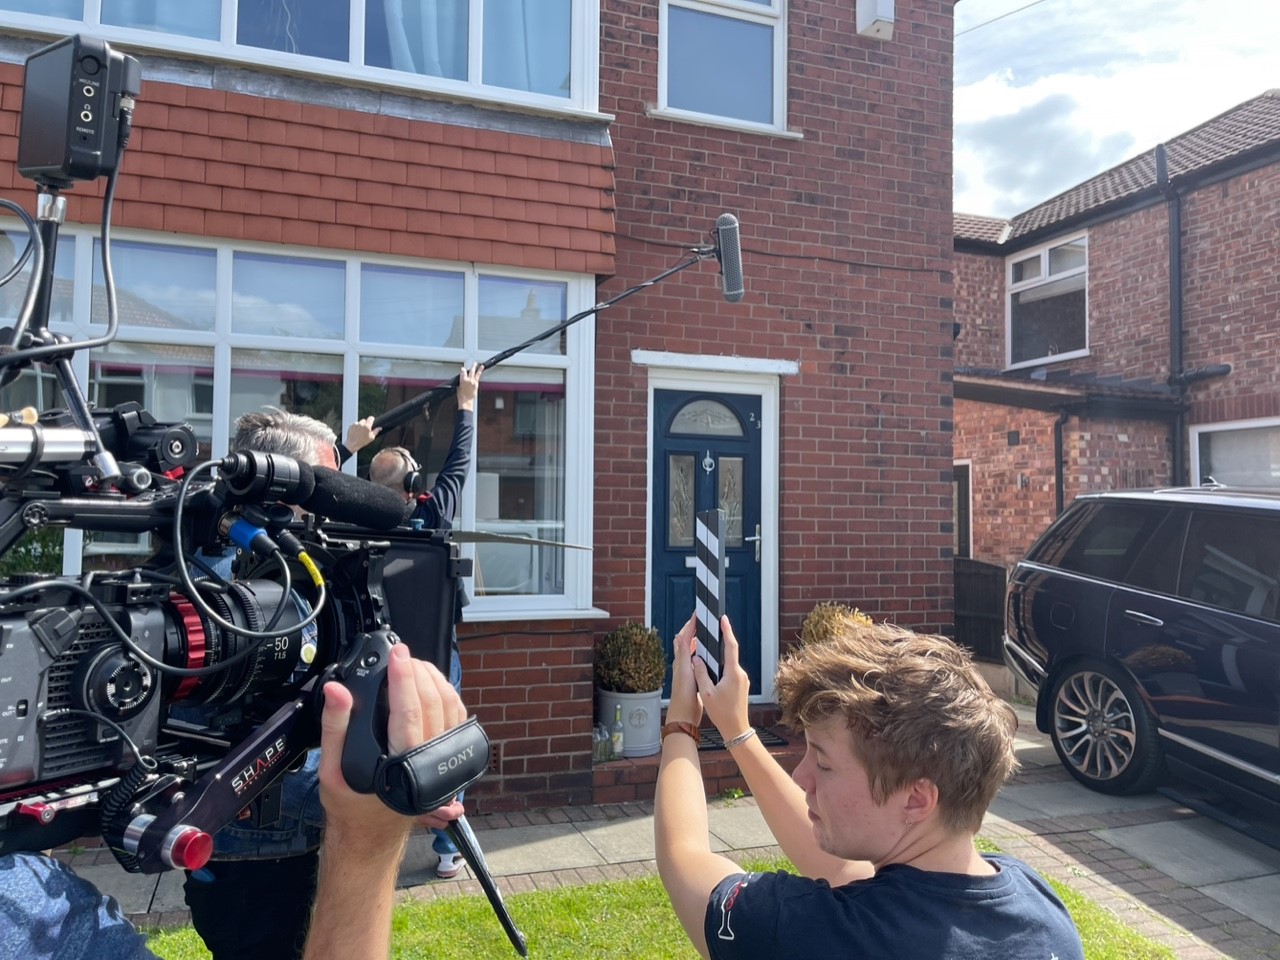 The film crew stands outside a contributor's house preparing to film.